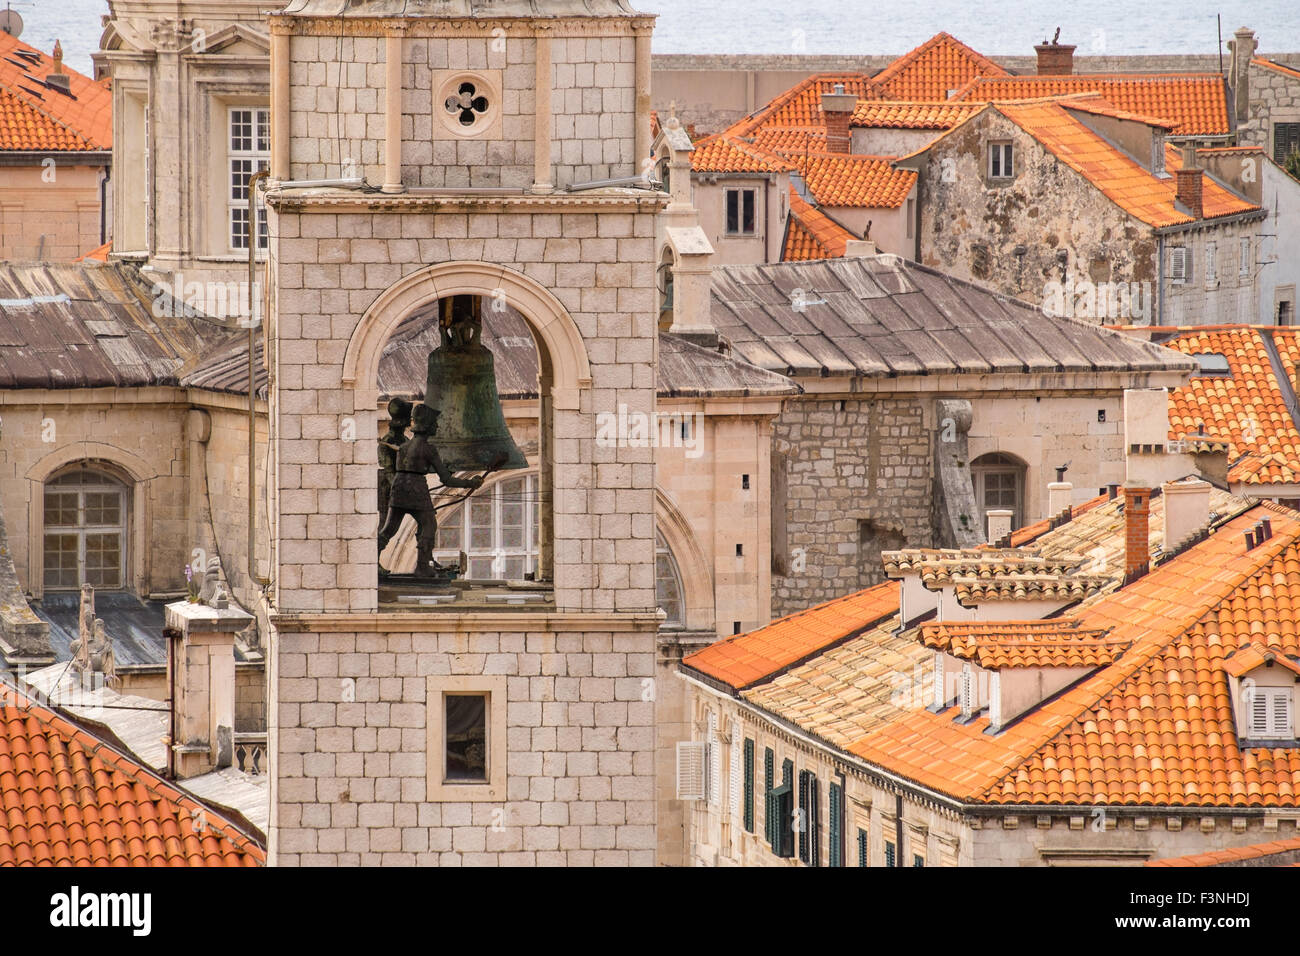 Clock Tower from the Old City walls, Dubrovnik. Croatia. Stock Photo